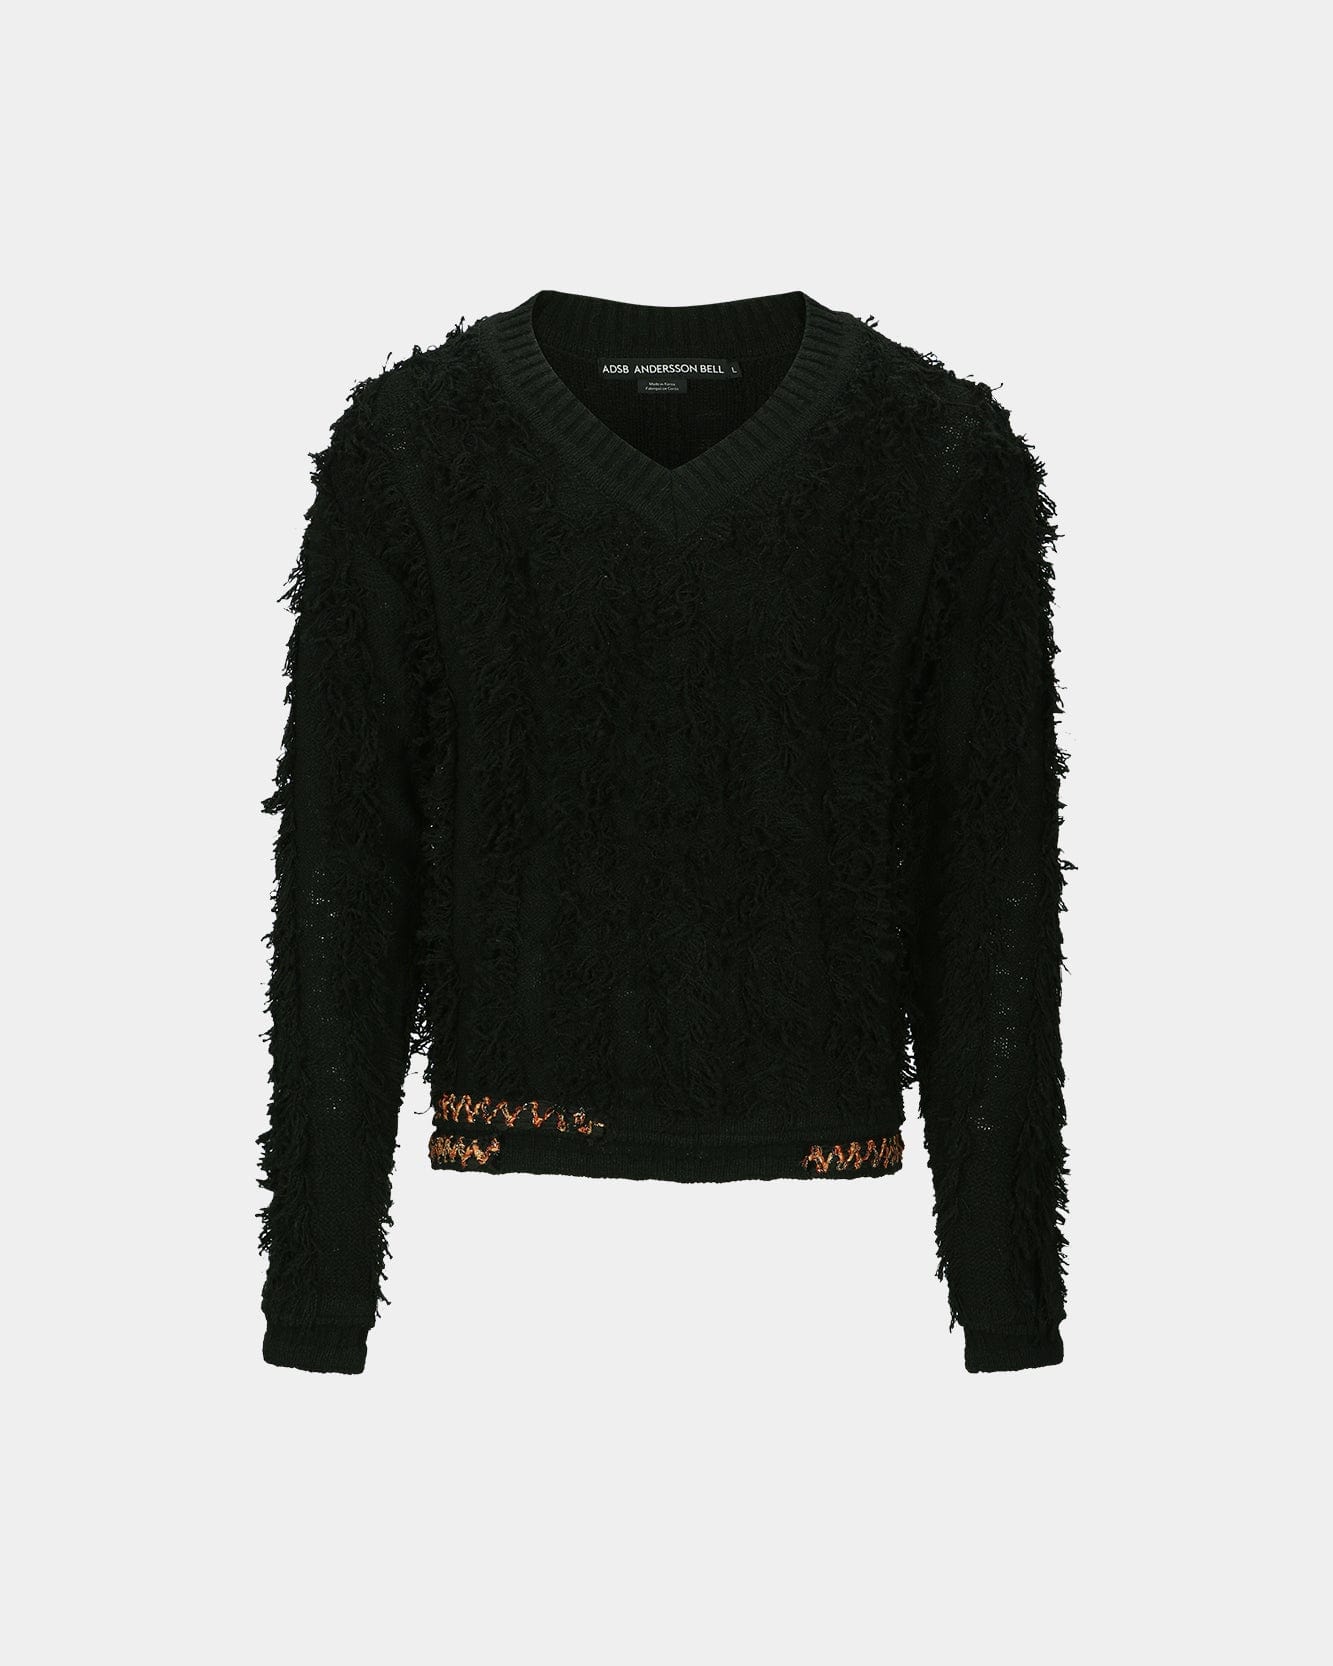 Andersson Bell WINGS V-NECK SWEATER atb1060m(BLACK)